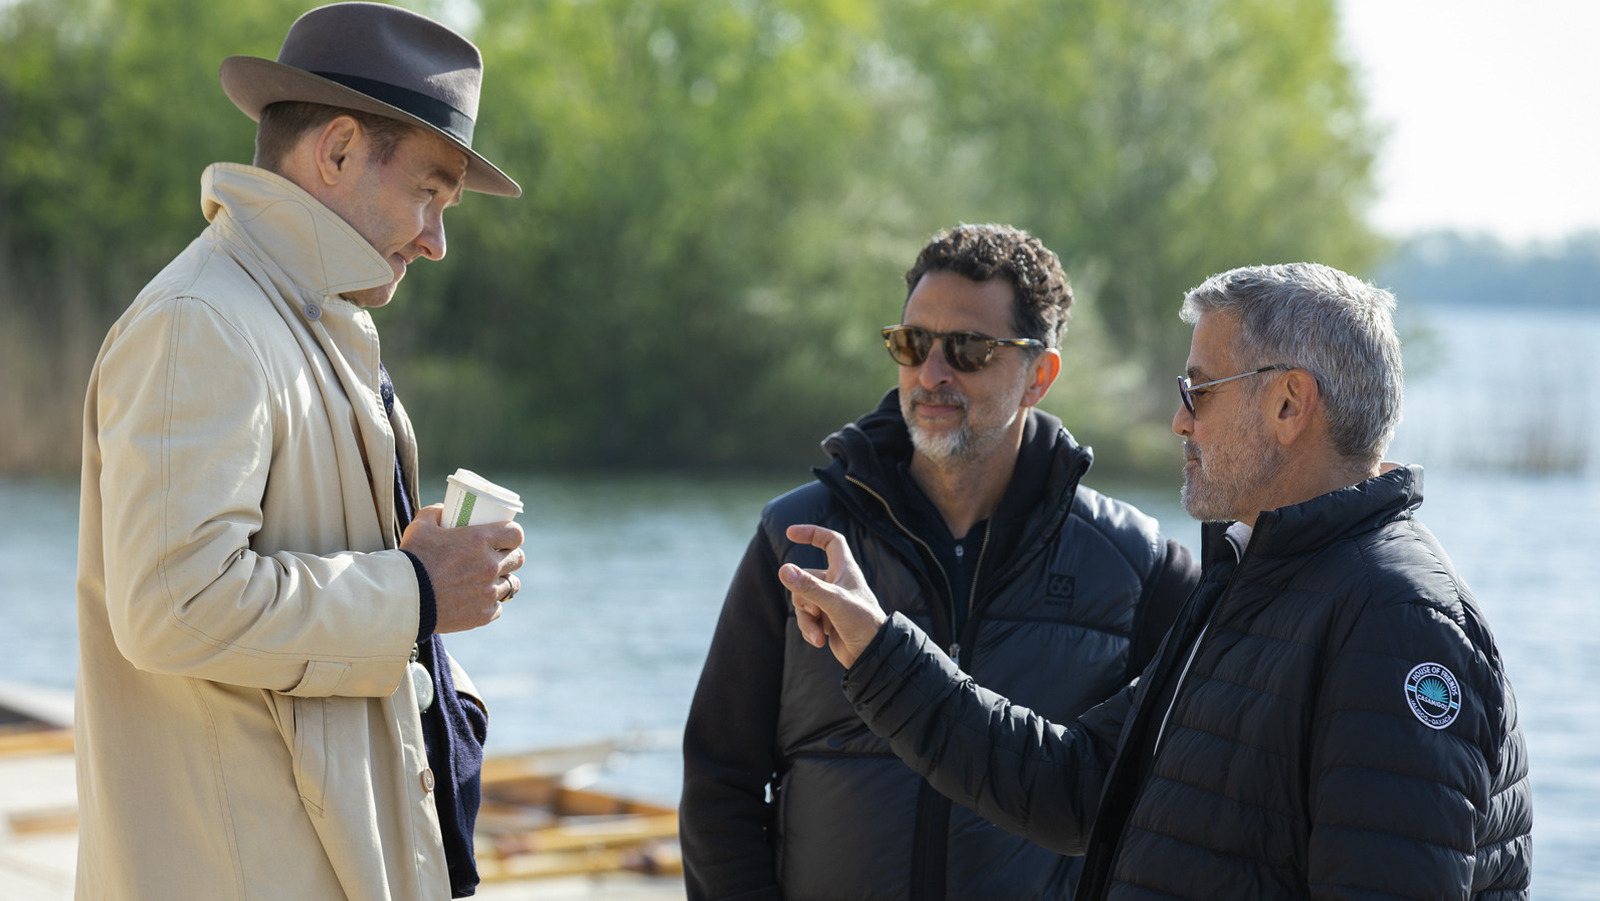 George Clooney And Joel Edgerton Made The Studio ‘Panic’ With The Boys In The Boat [Exclusive Interview]